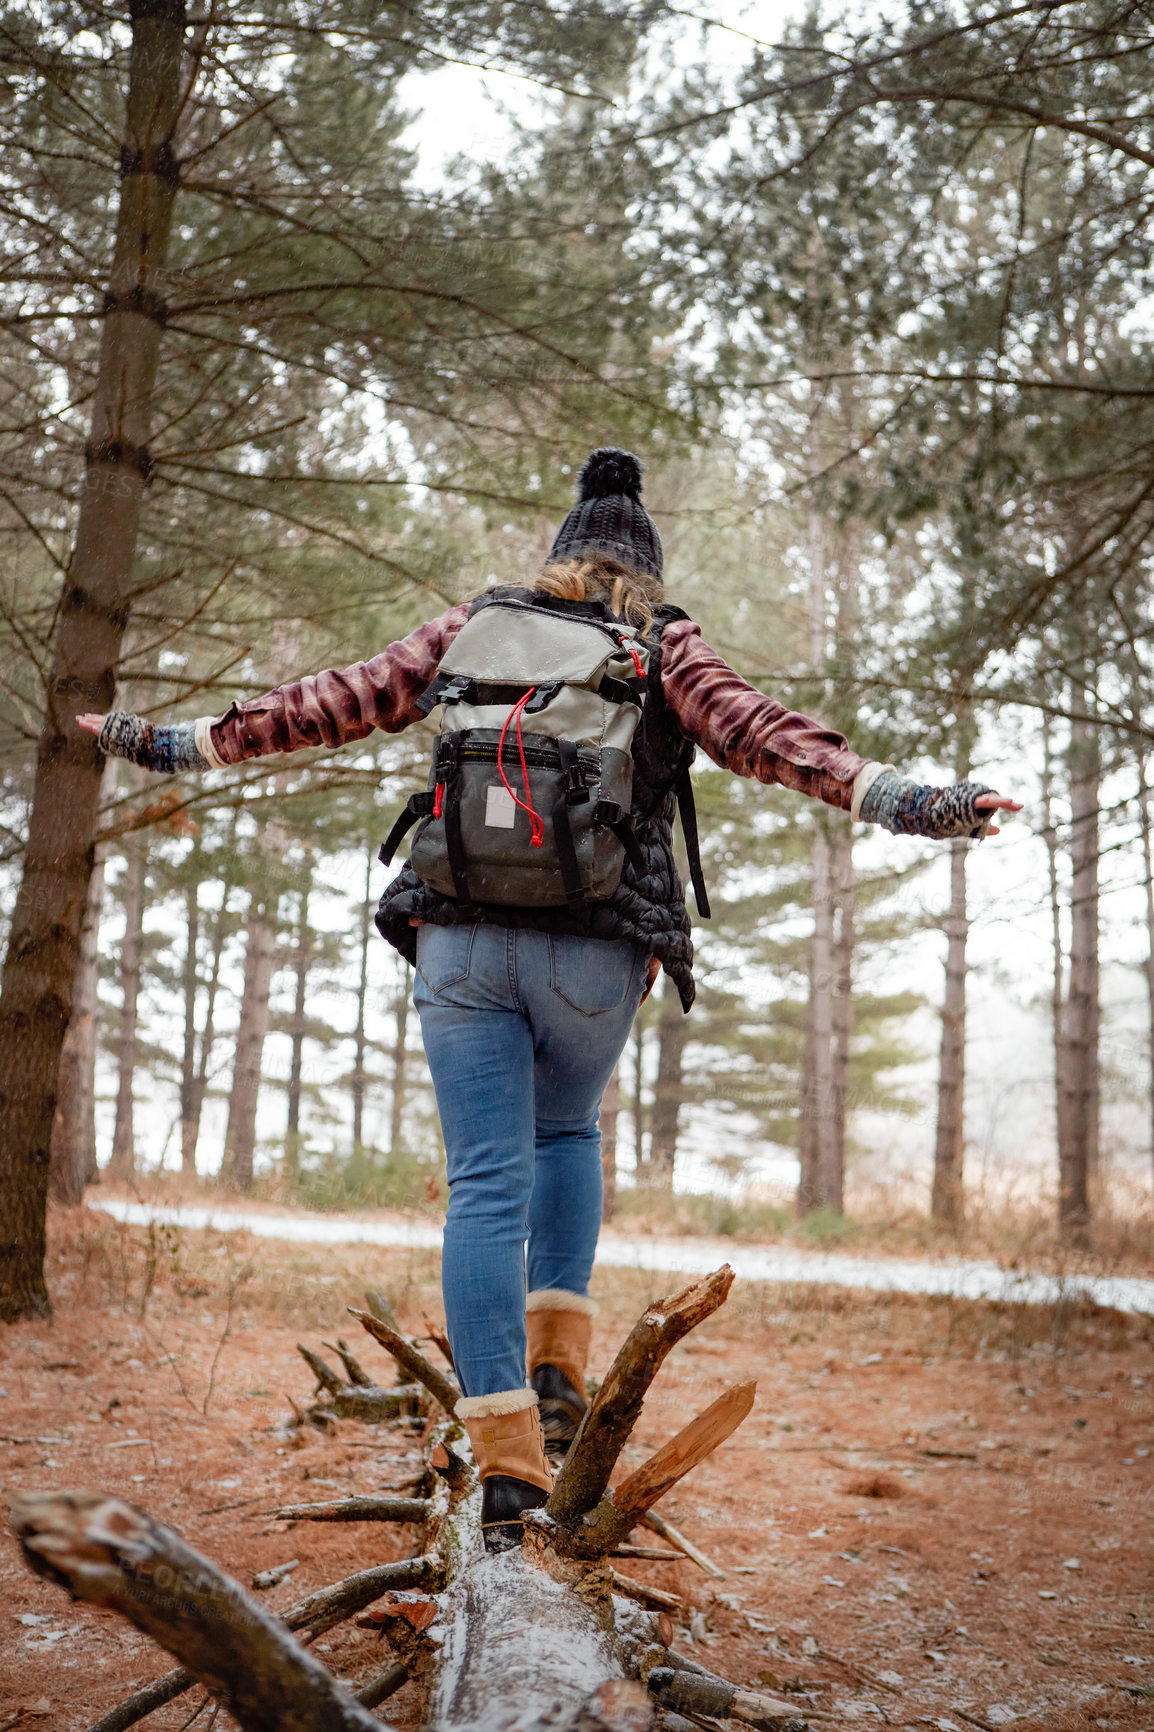 Buy stock photo Rearview shot of a young woman walking on a tree log in the wilderness during winter